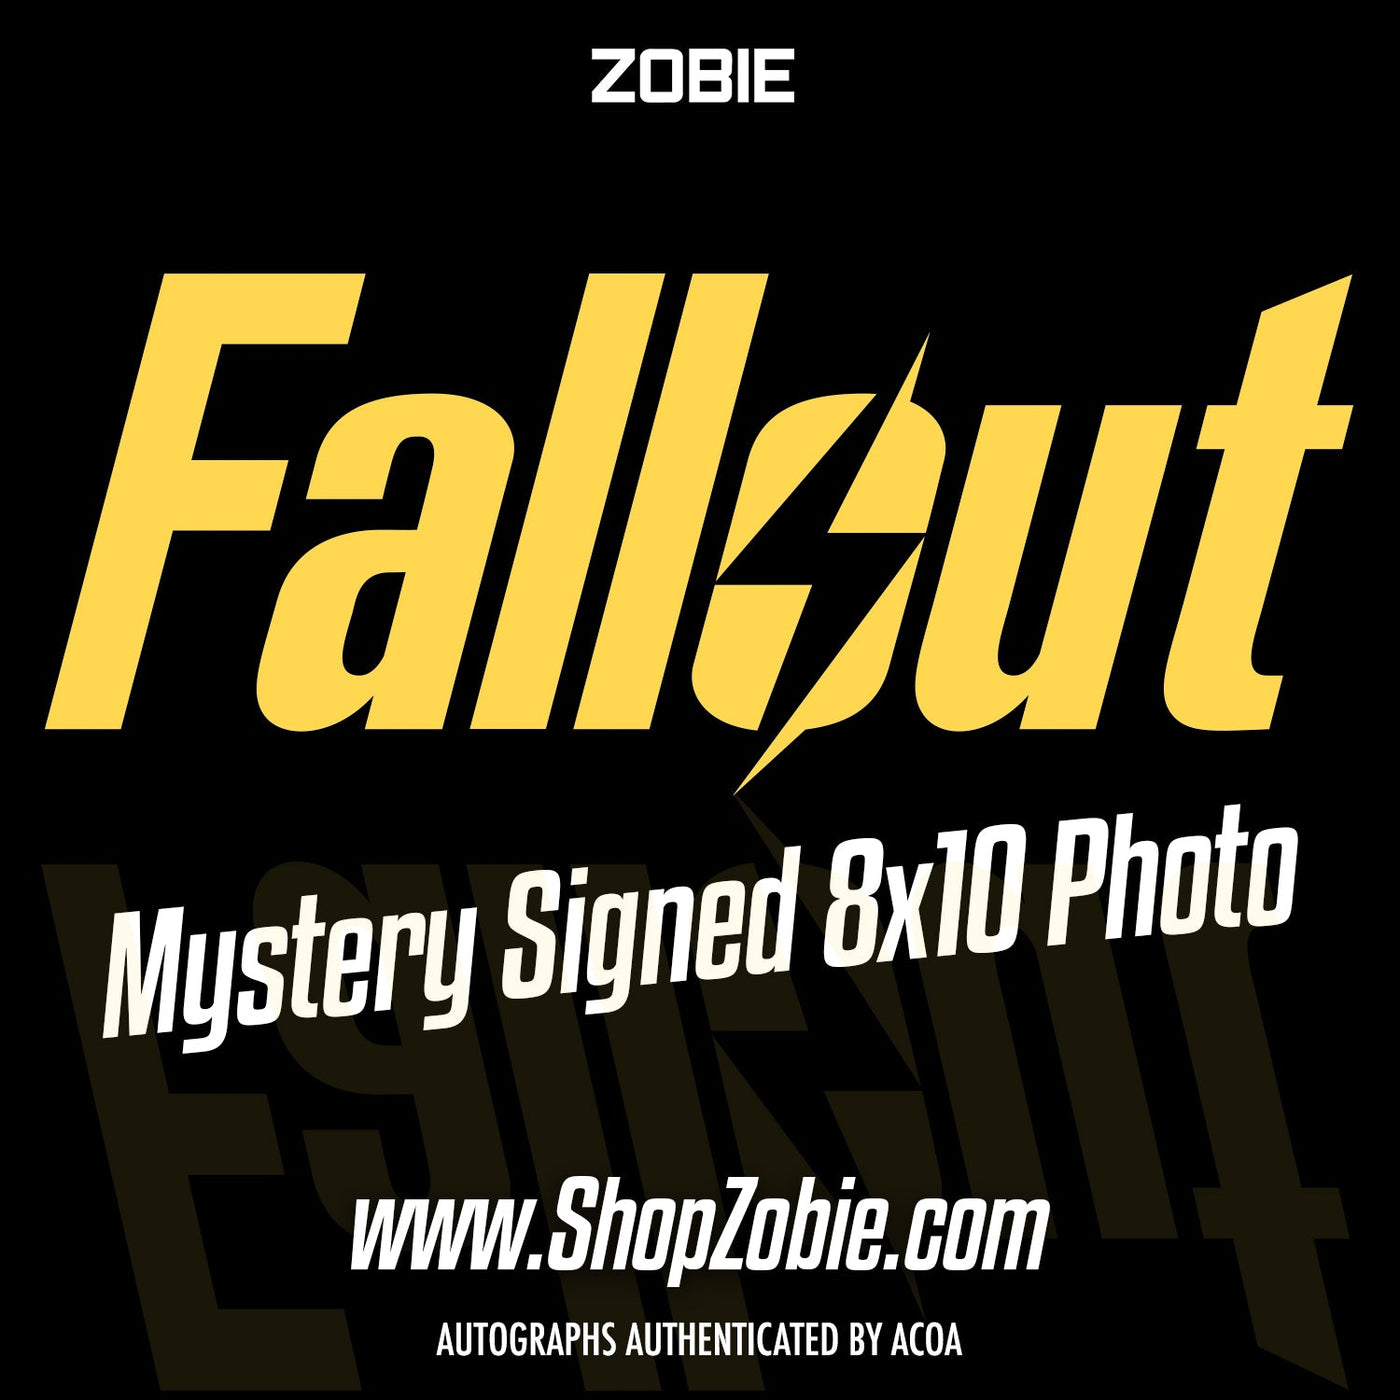 SPECIAL Fallout TV Series Signed Mystery 8x10 Photo